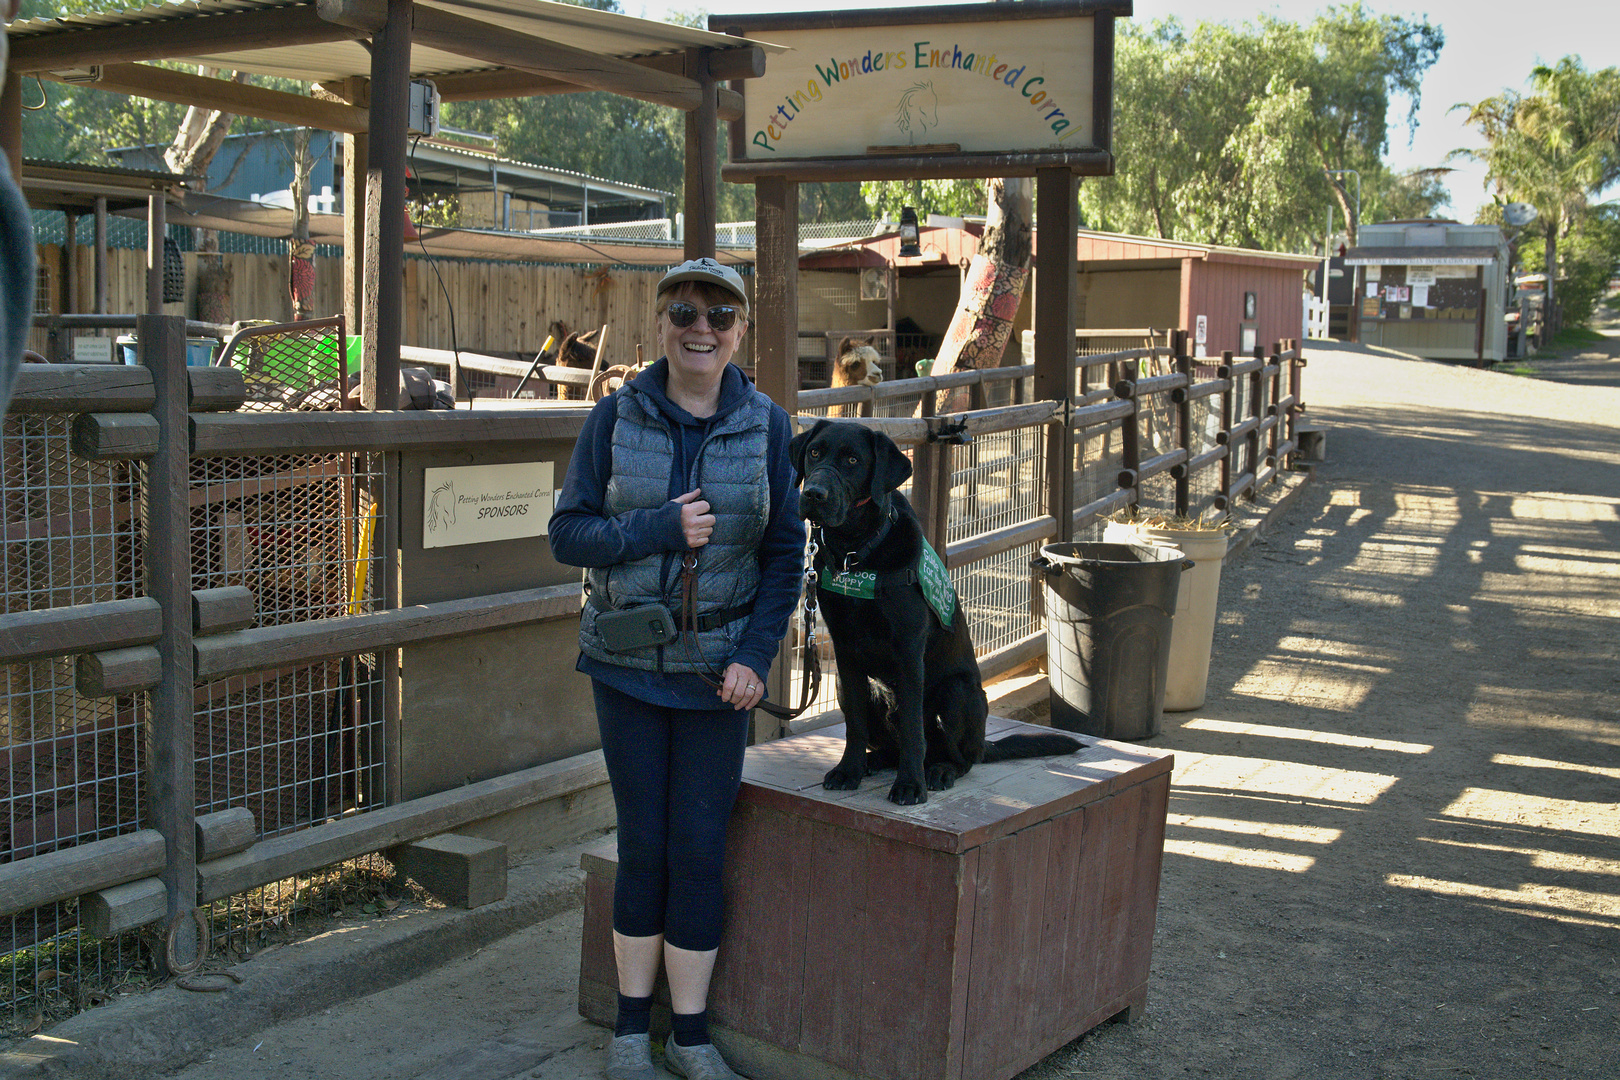 Brenda with Dash VI at the petting zoo